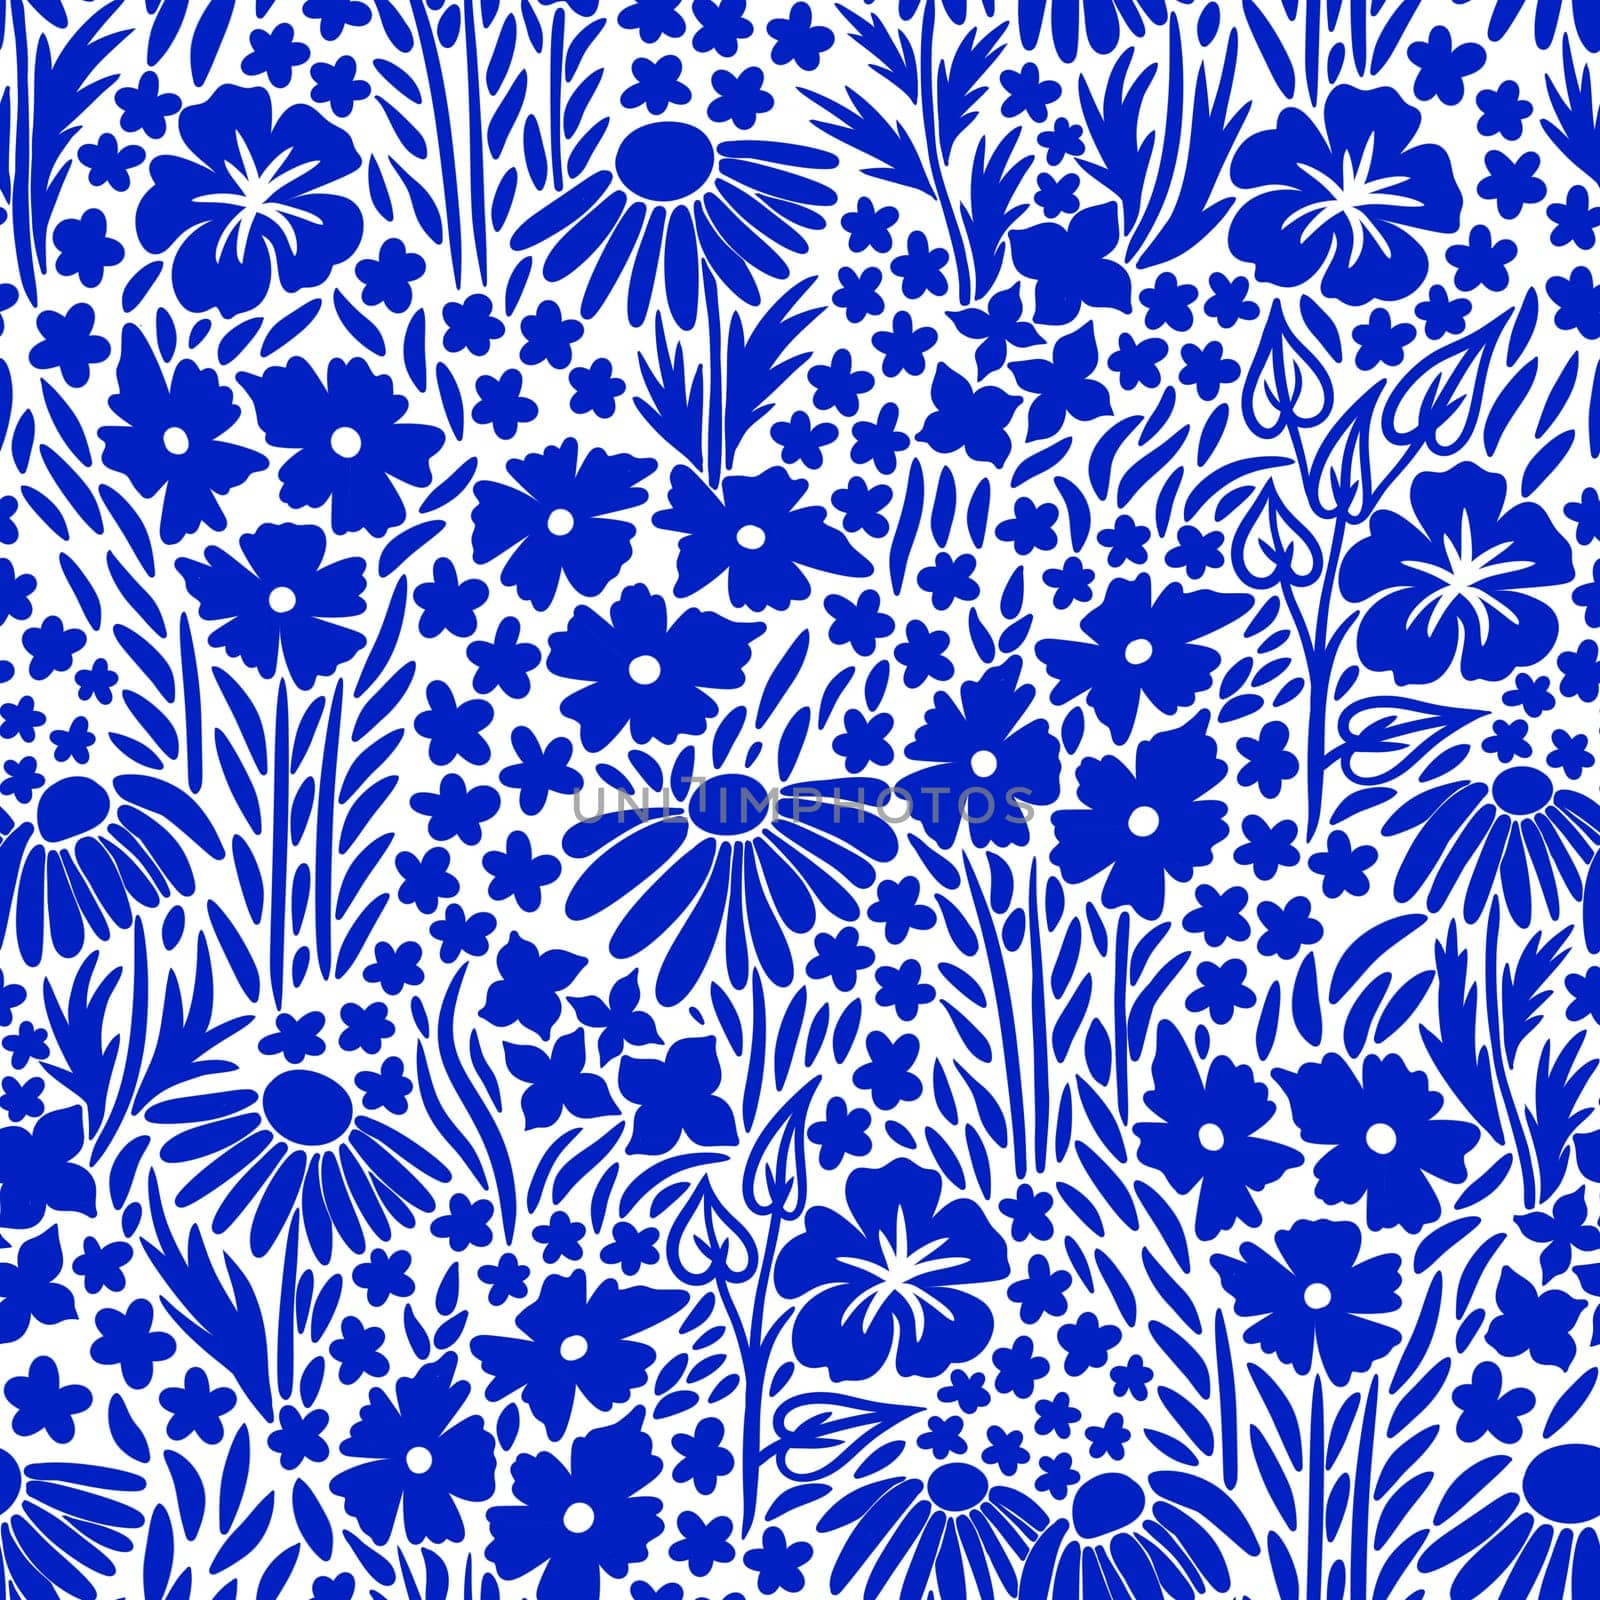 Hand drawn seamless floral flower pattern with cobalt blue wildflowers on white background. Chinoiserie style cottagecore summer garden meadow bloom blossom design, daisy ditsy art . by Lagmar